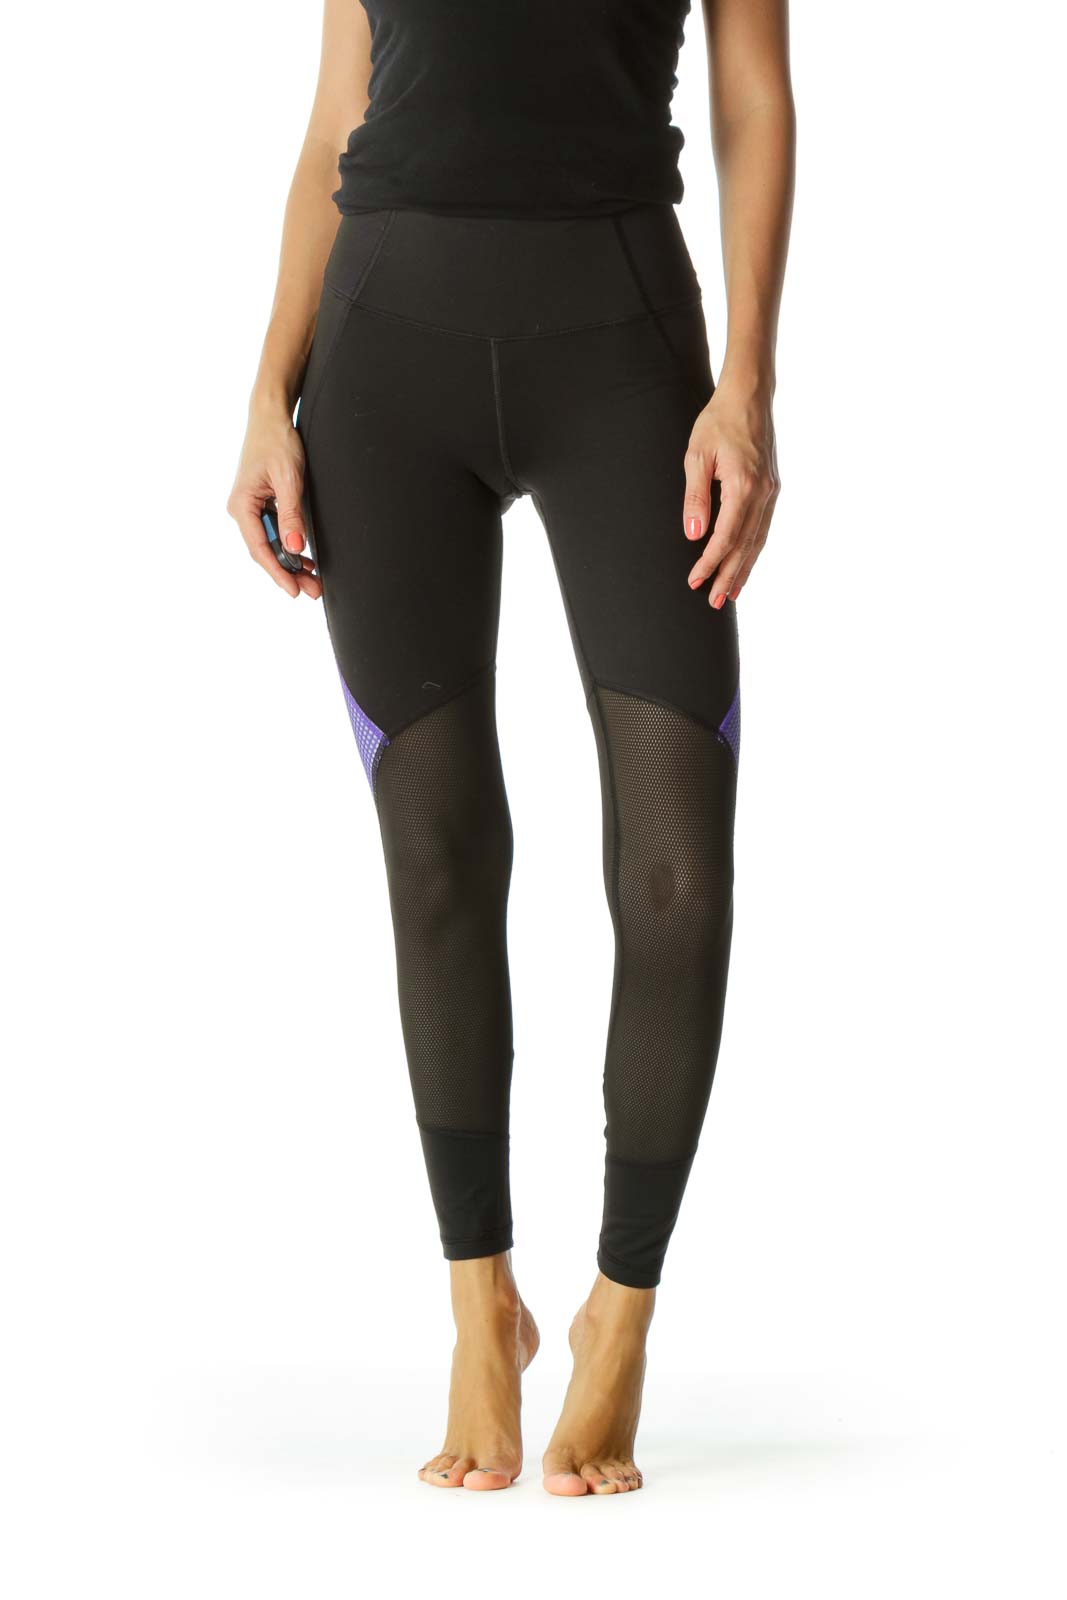 Black Purple Mesh Mixed-Media Sports Leggings with Inside Hip Pocket Front